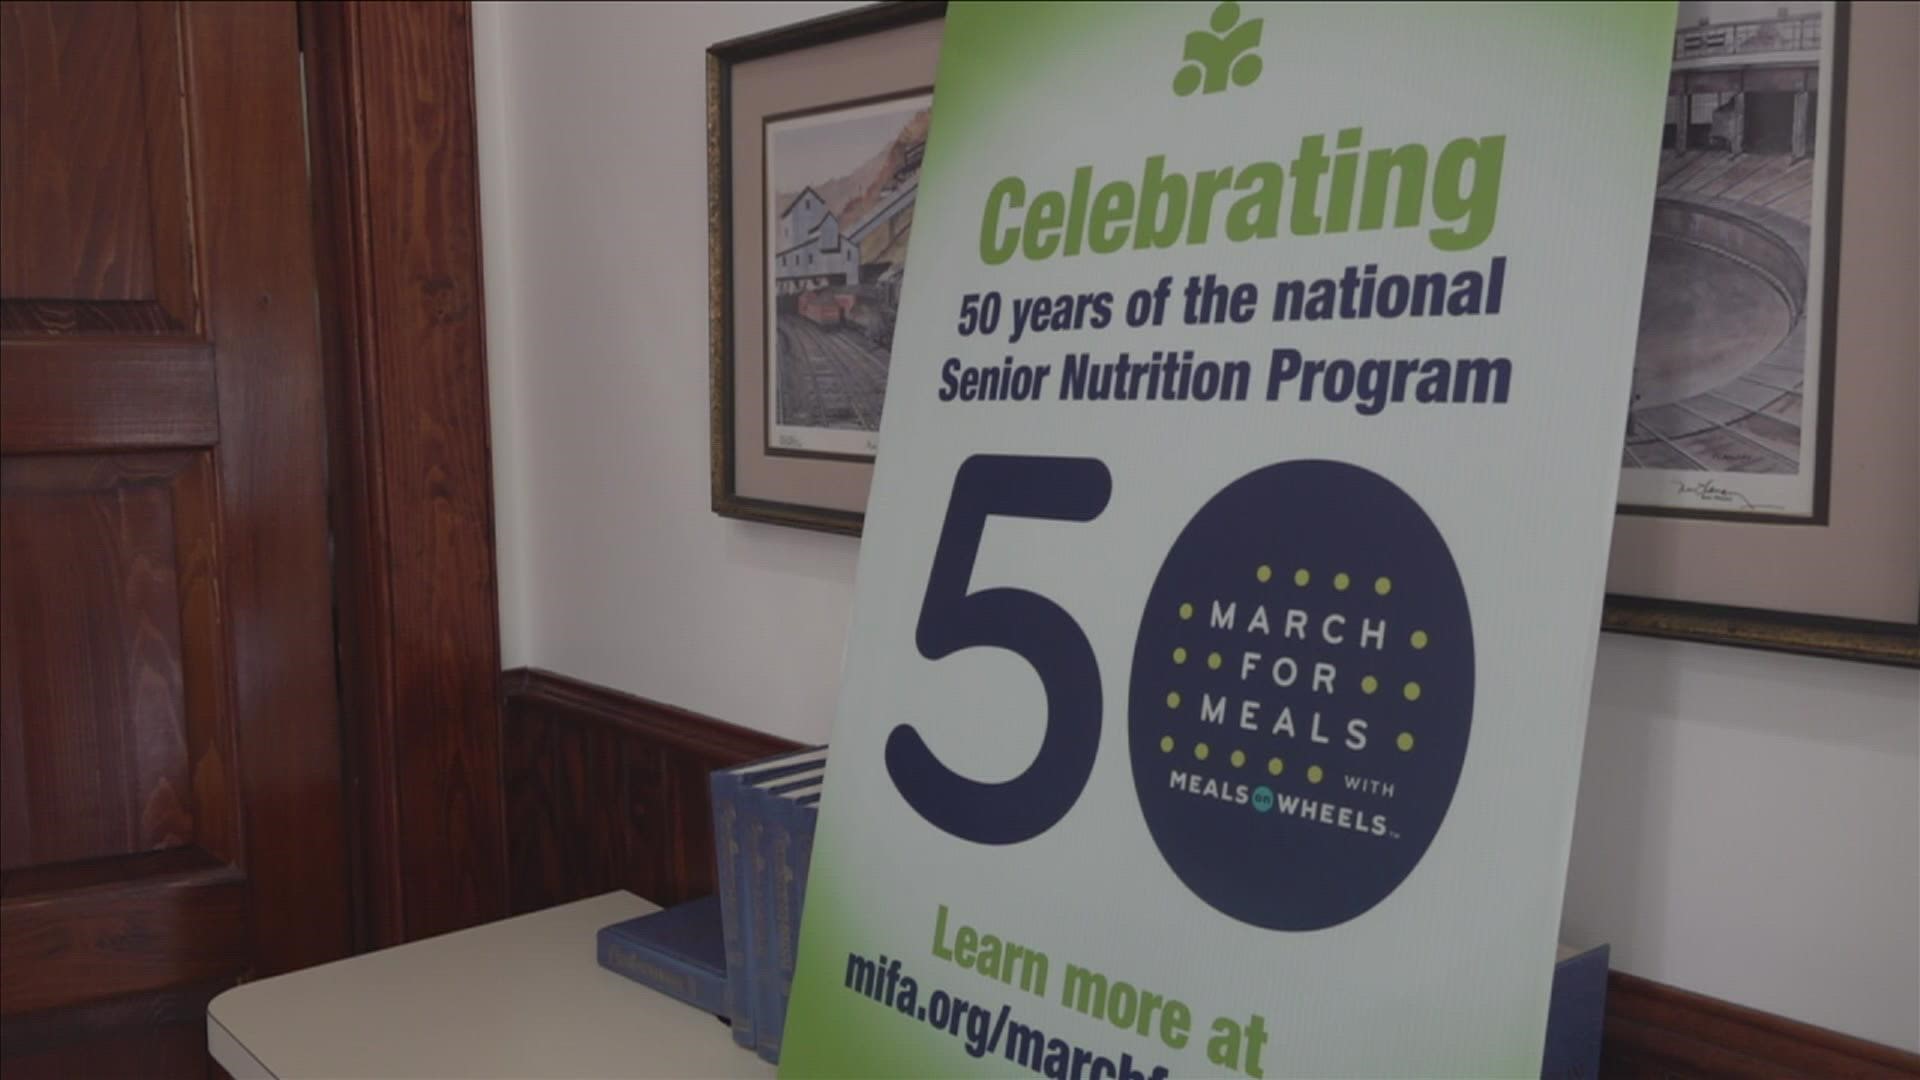 Throughout the month of March, MIFA will help raise awareness and rally support for its programs that help feed seniors in need.